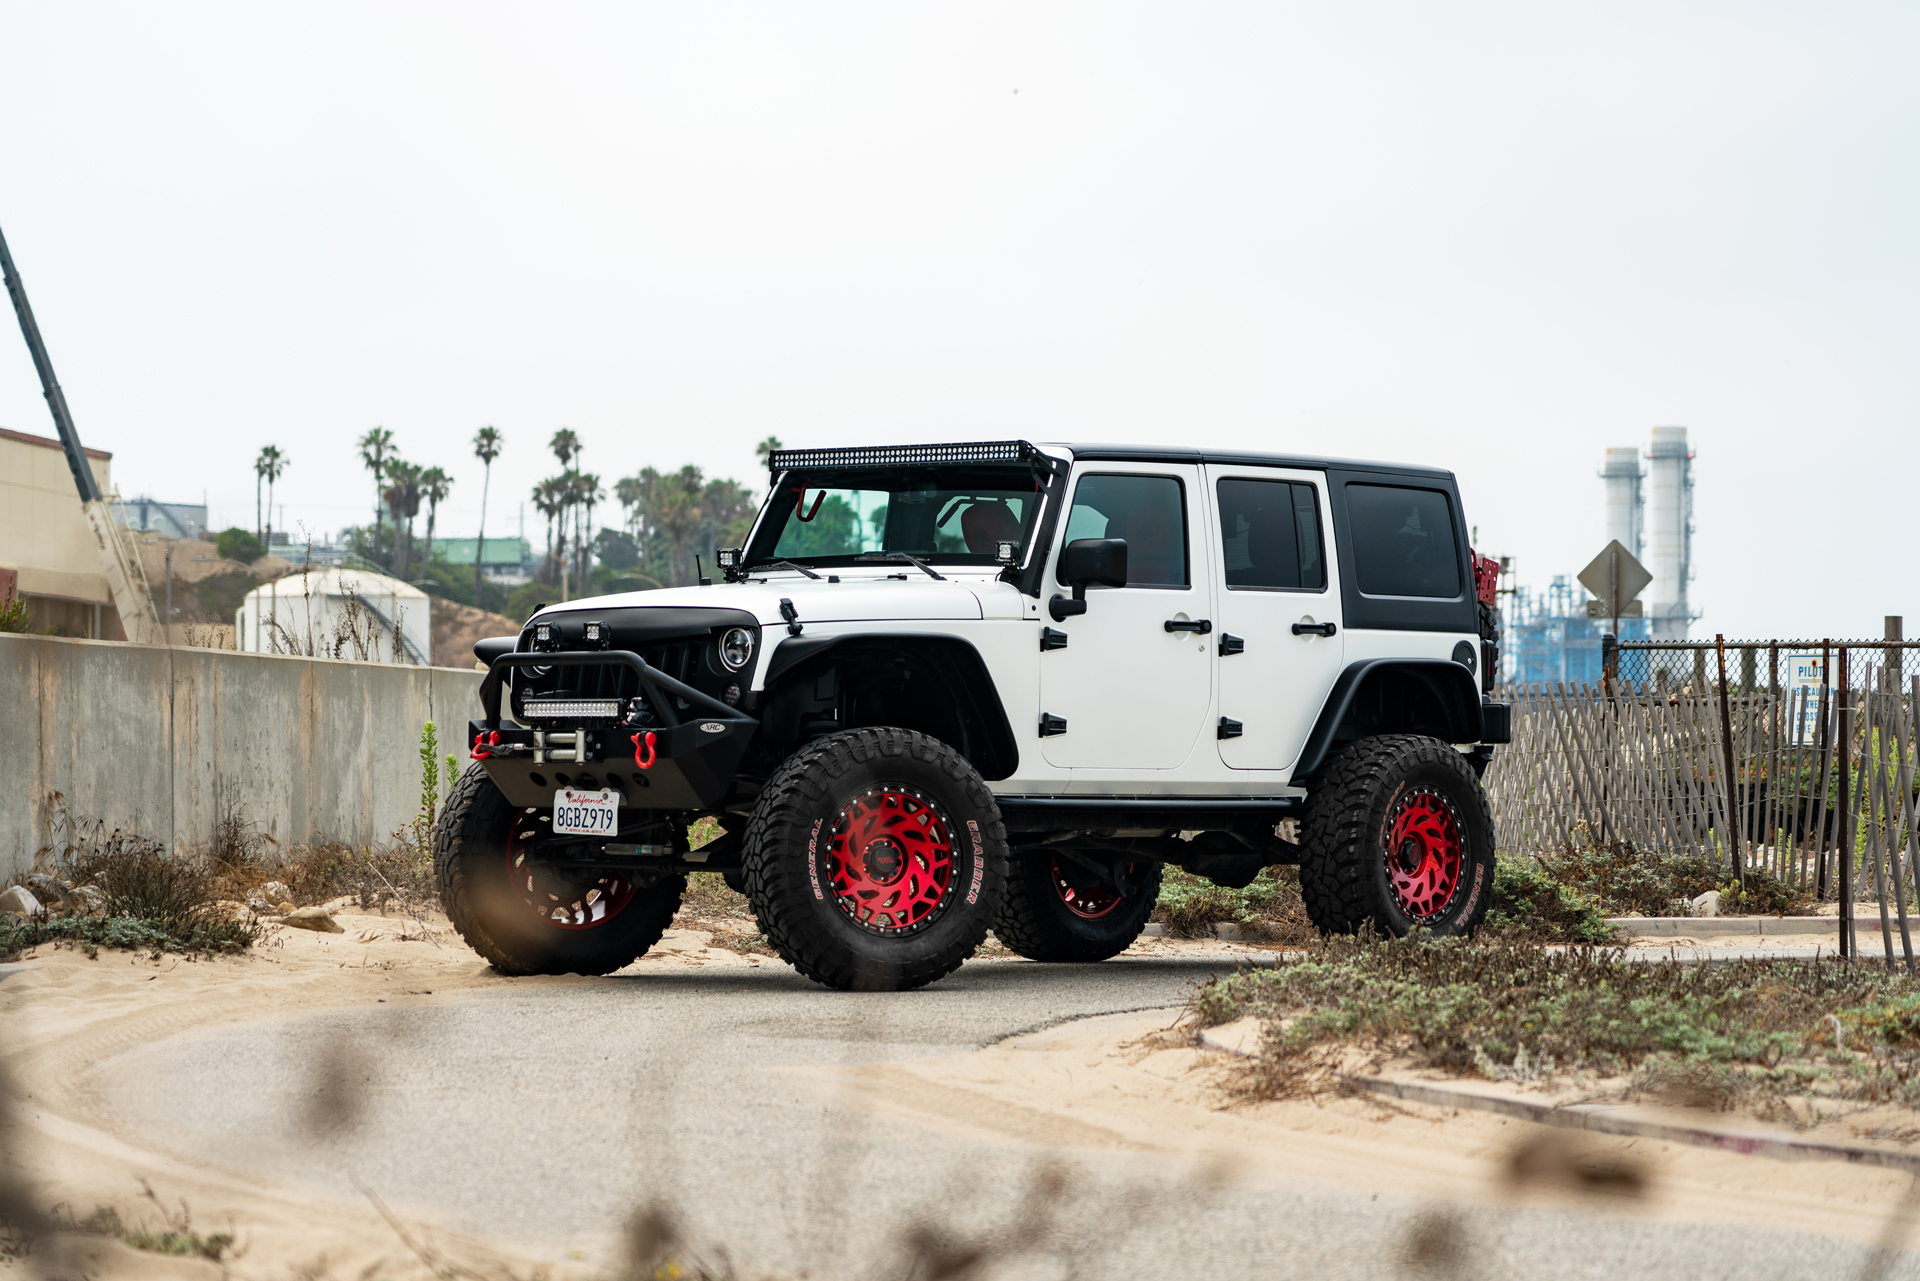 M50 Off-Road Monster Wheels on a White Jeep JK